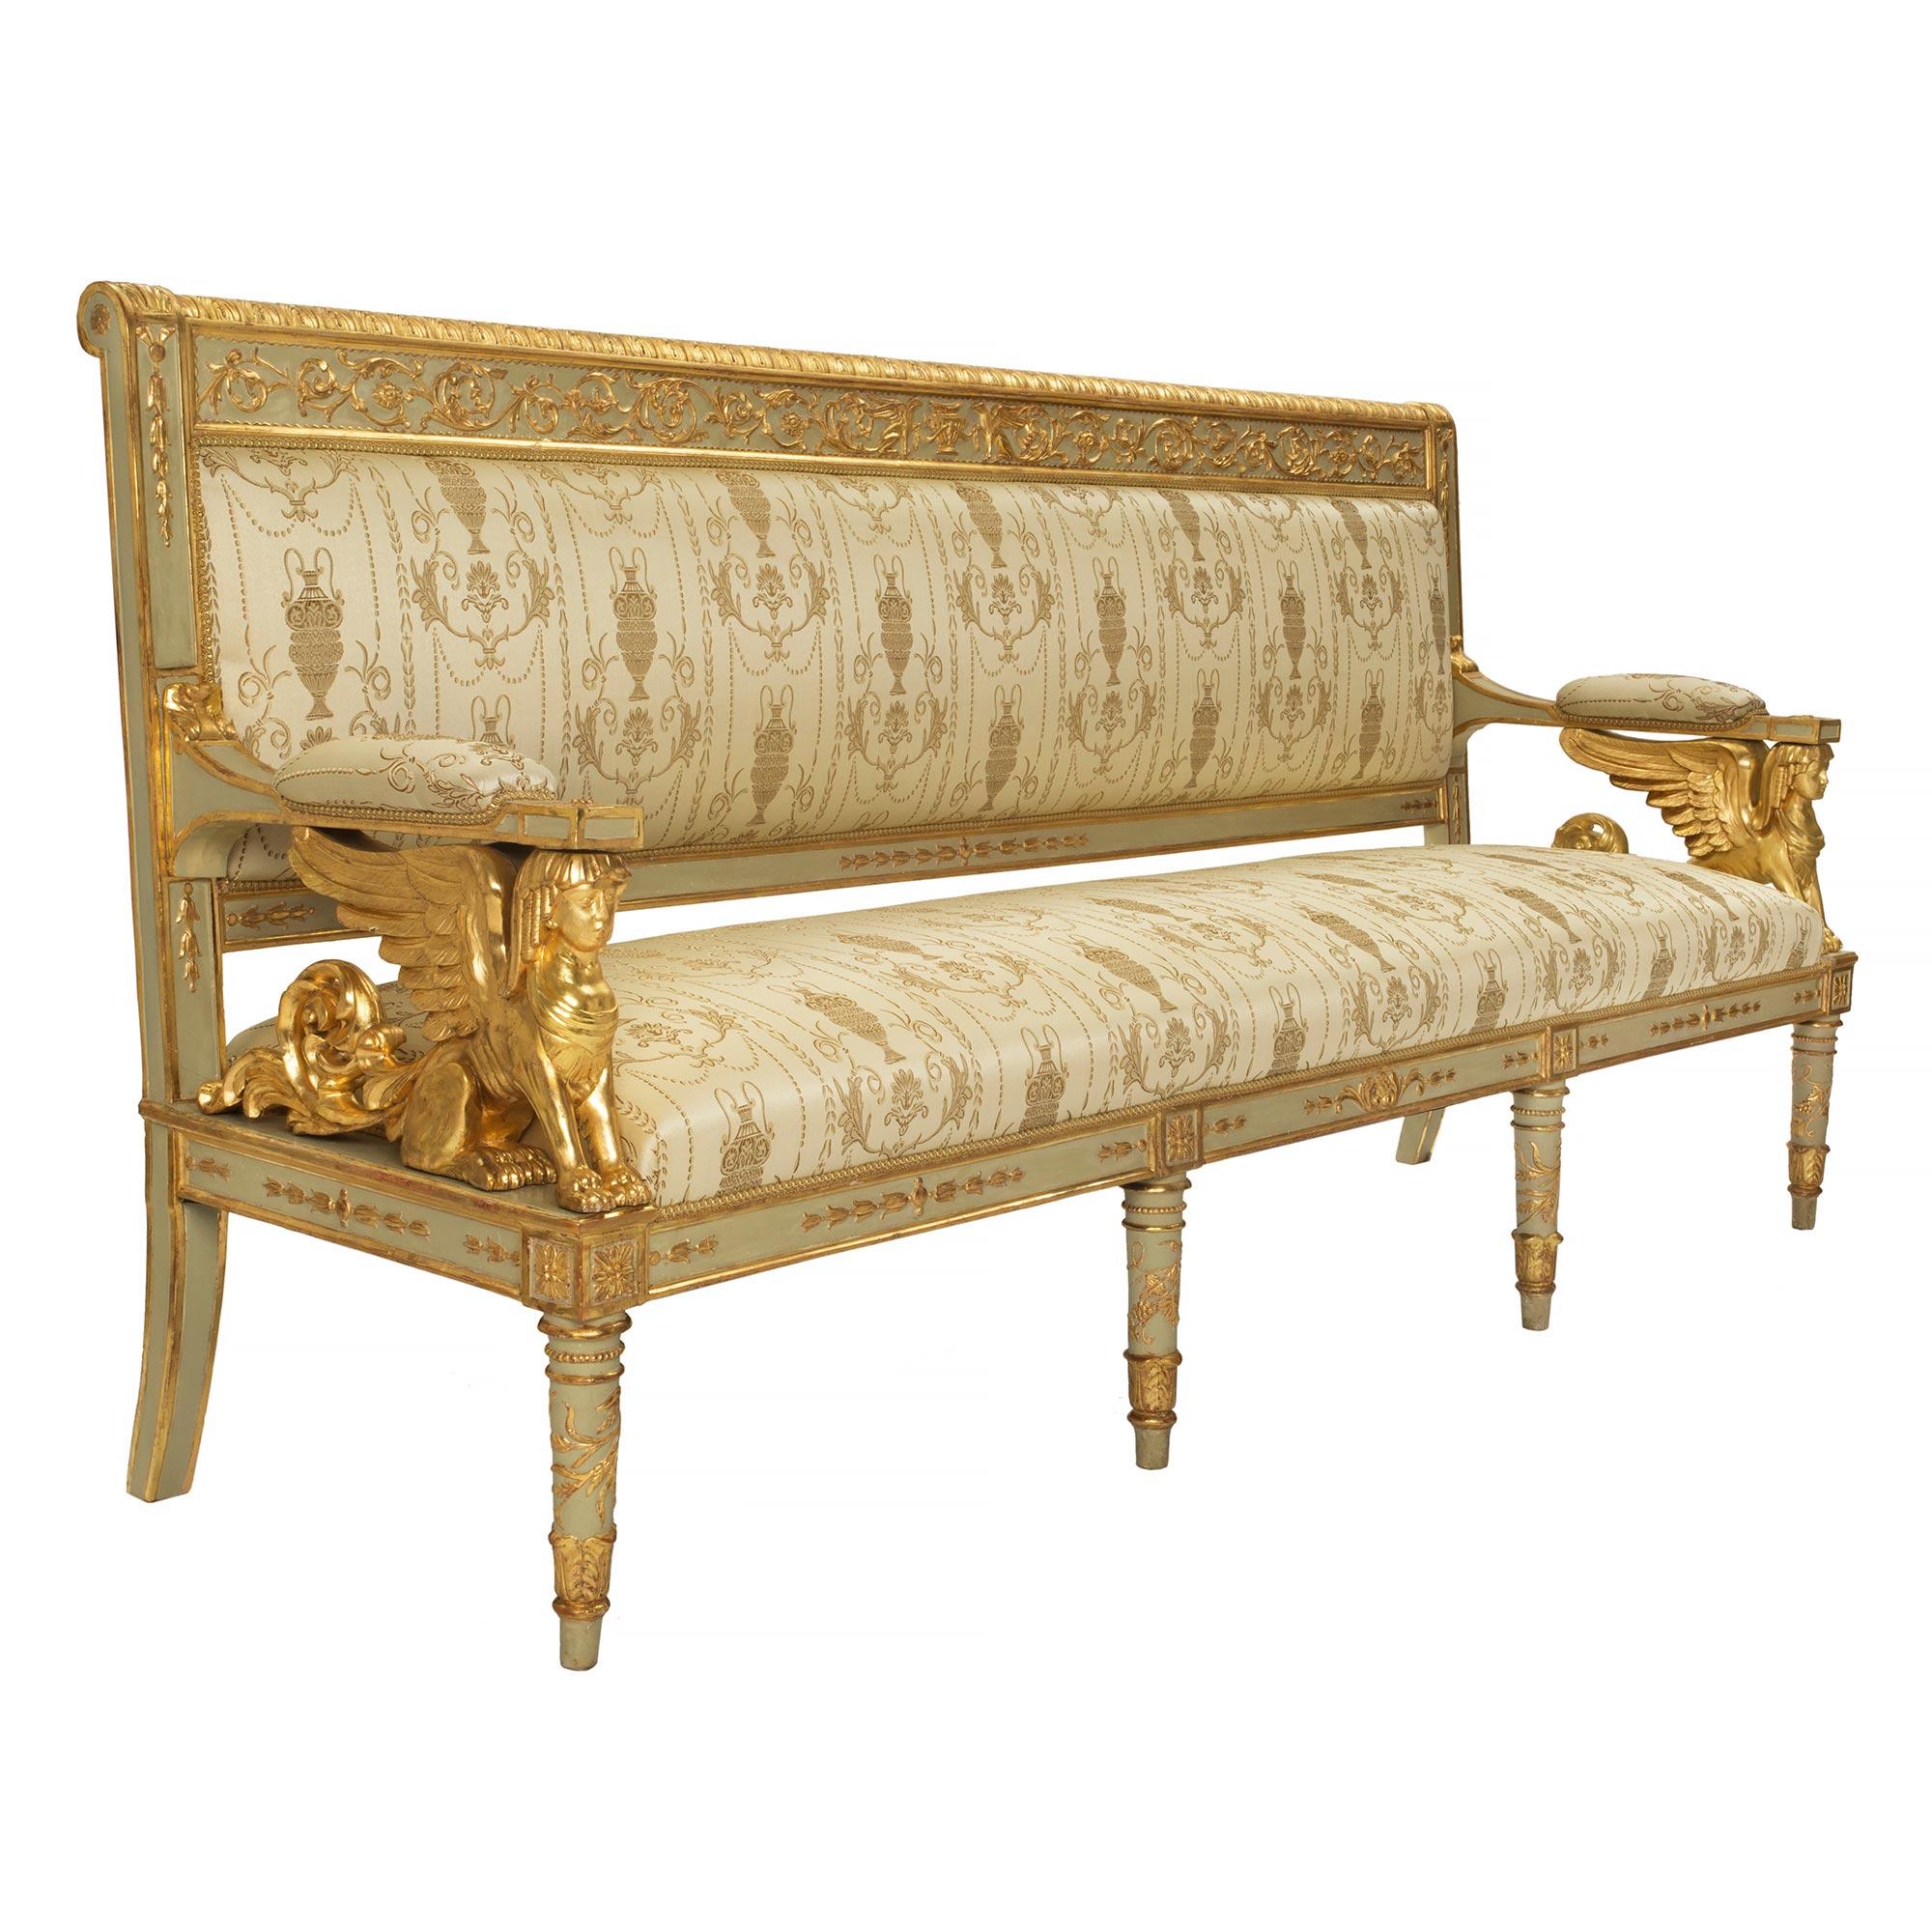 Giltwood Italian Mid-19th Century Neoclassical Style Settee For Sale